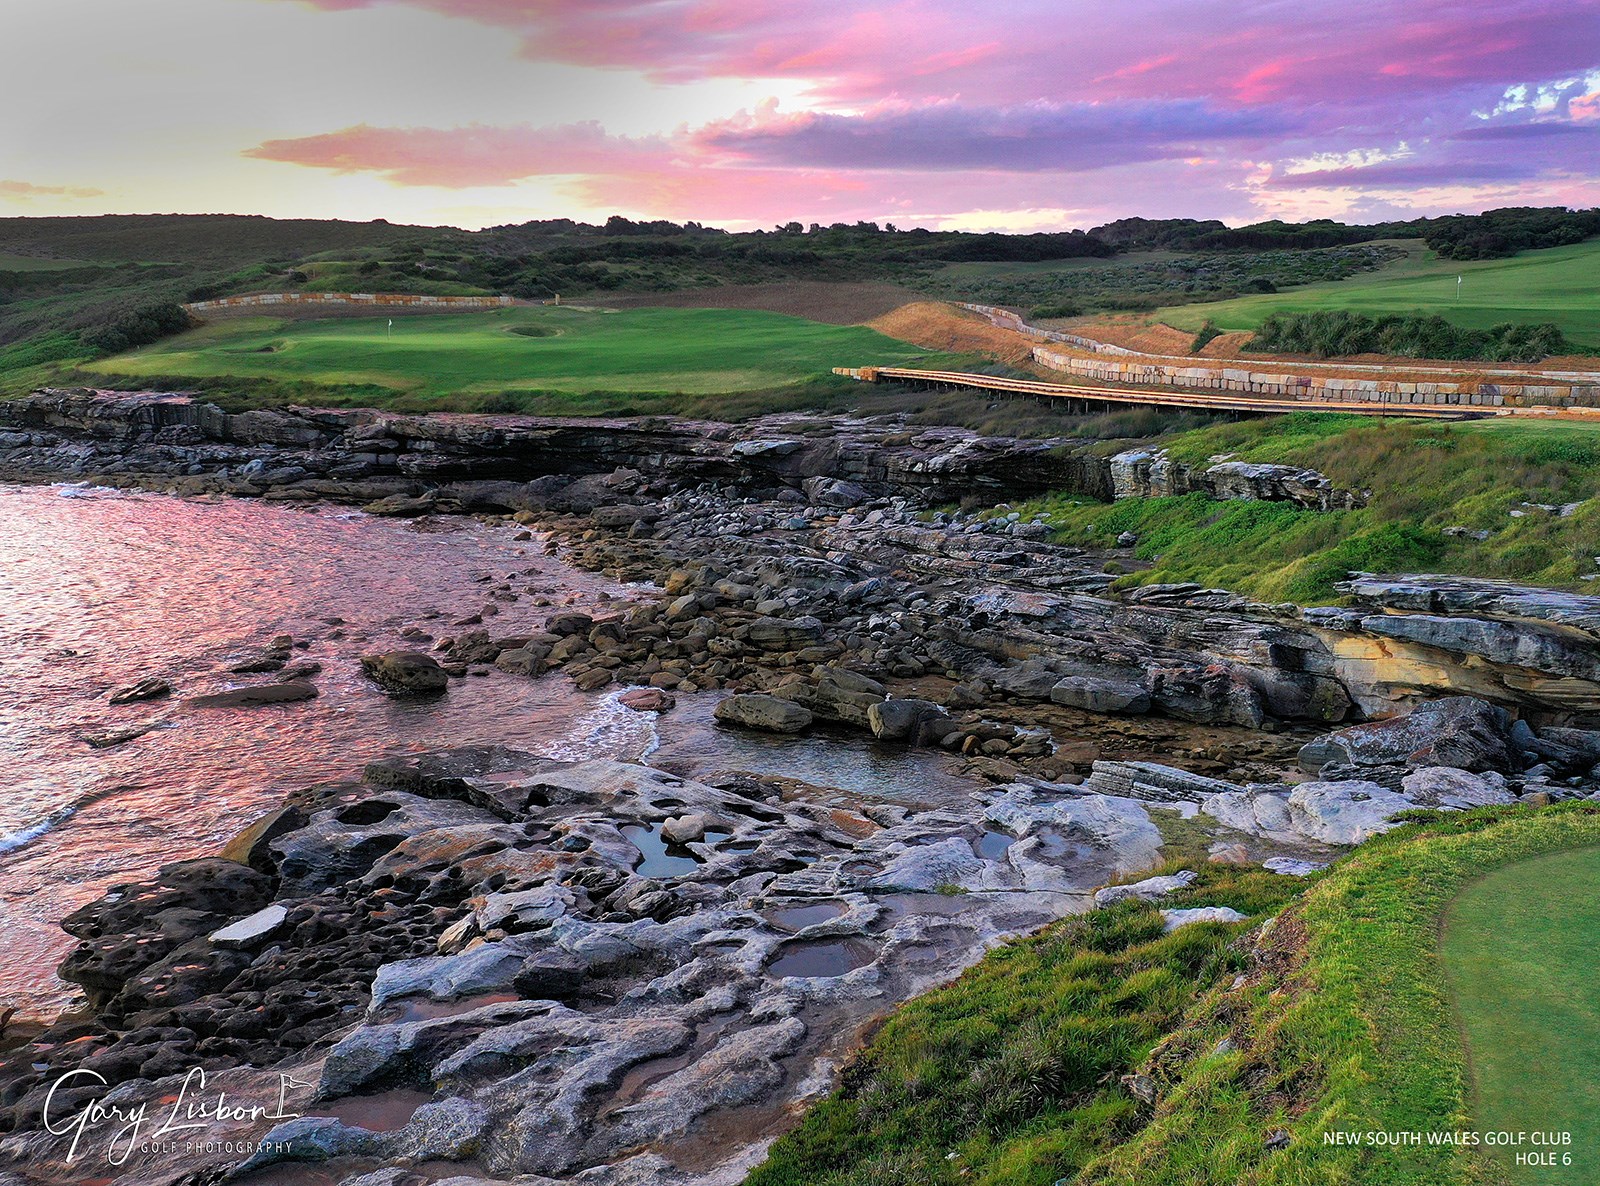 The New South Wales Golf Club Hole 6